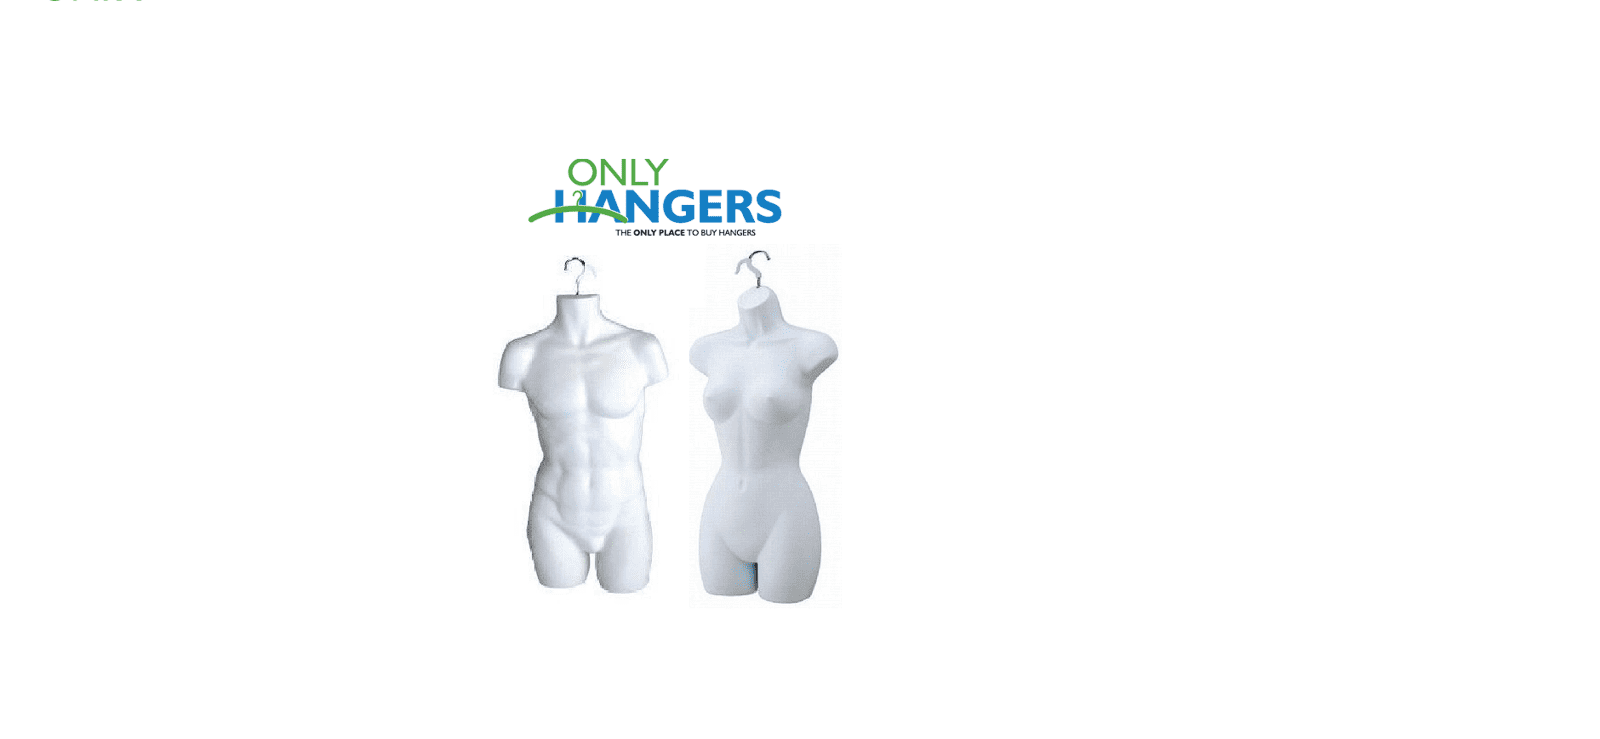 Details about   3 pcs Hanging Mannequin Torso Set White Male Child & Toddler Body Forms 3 Hooks 